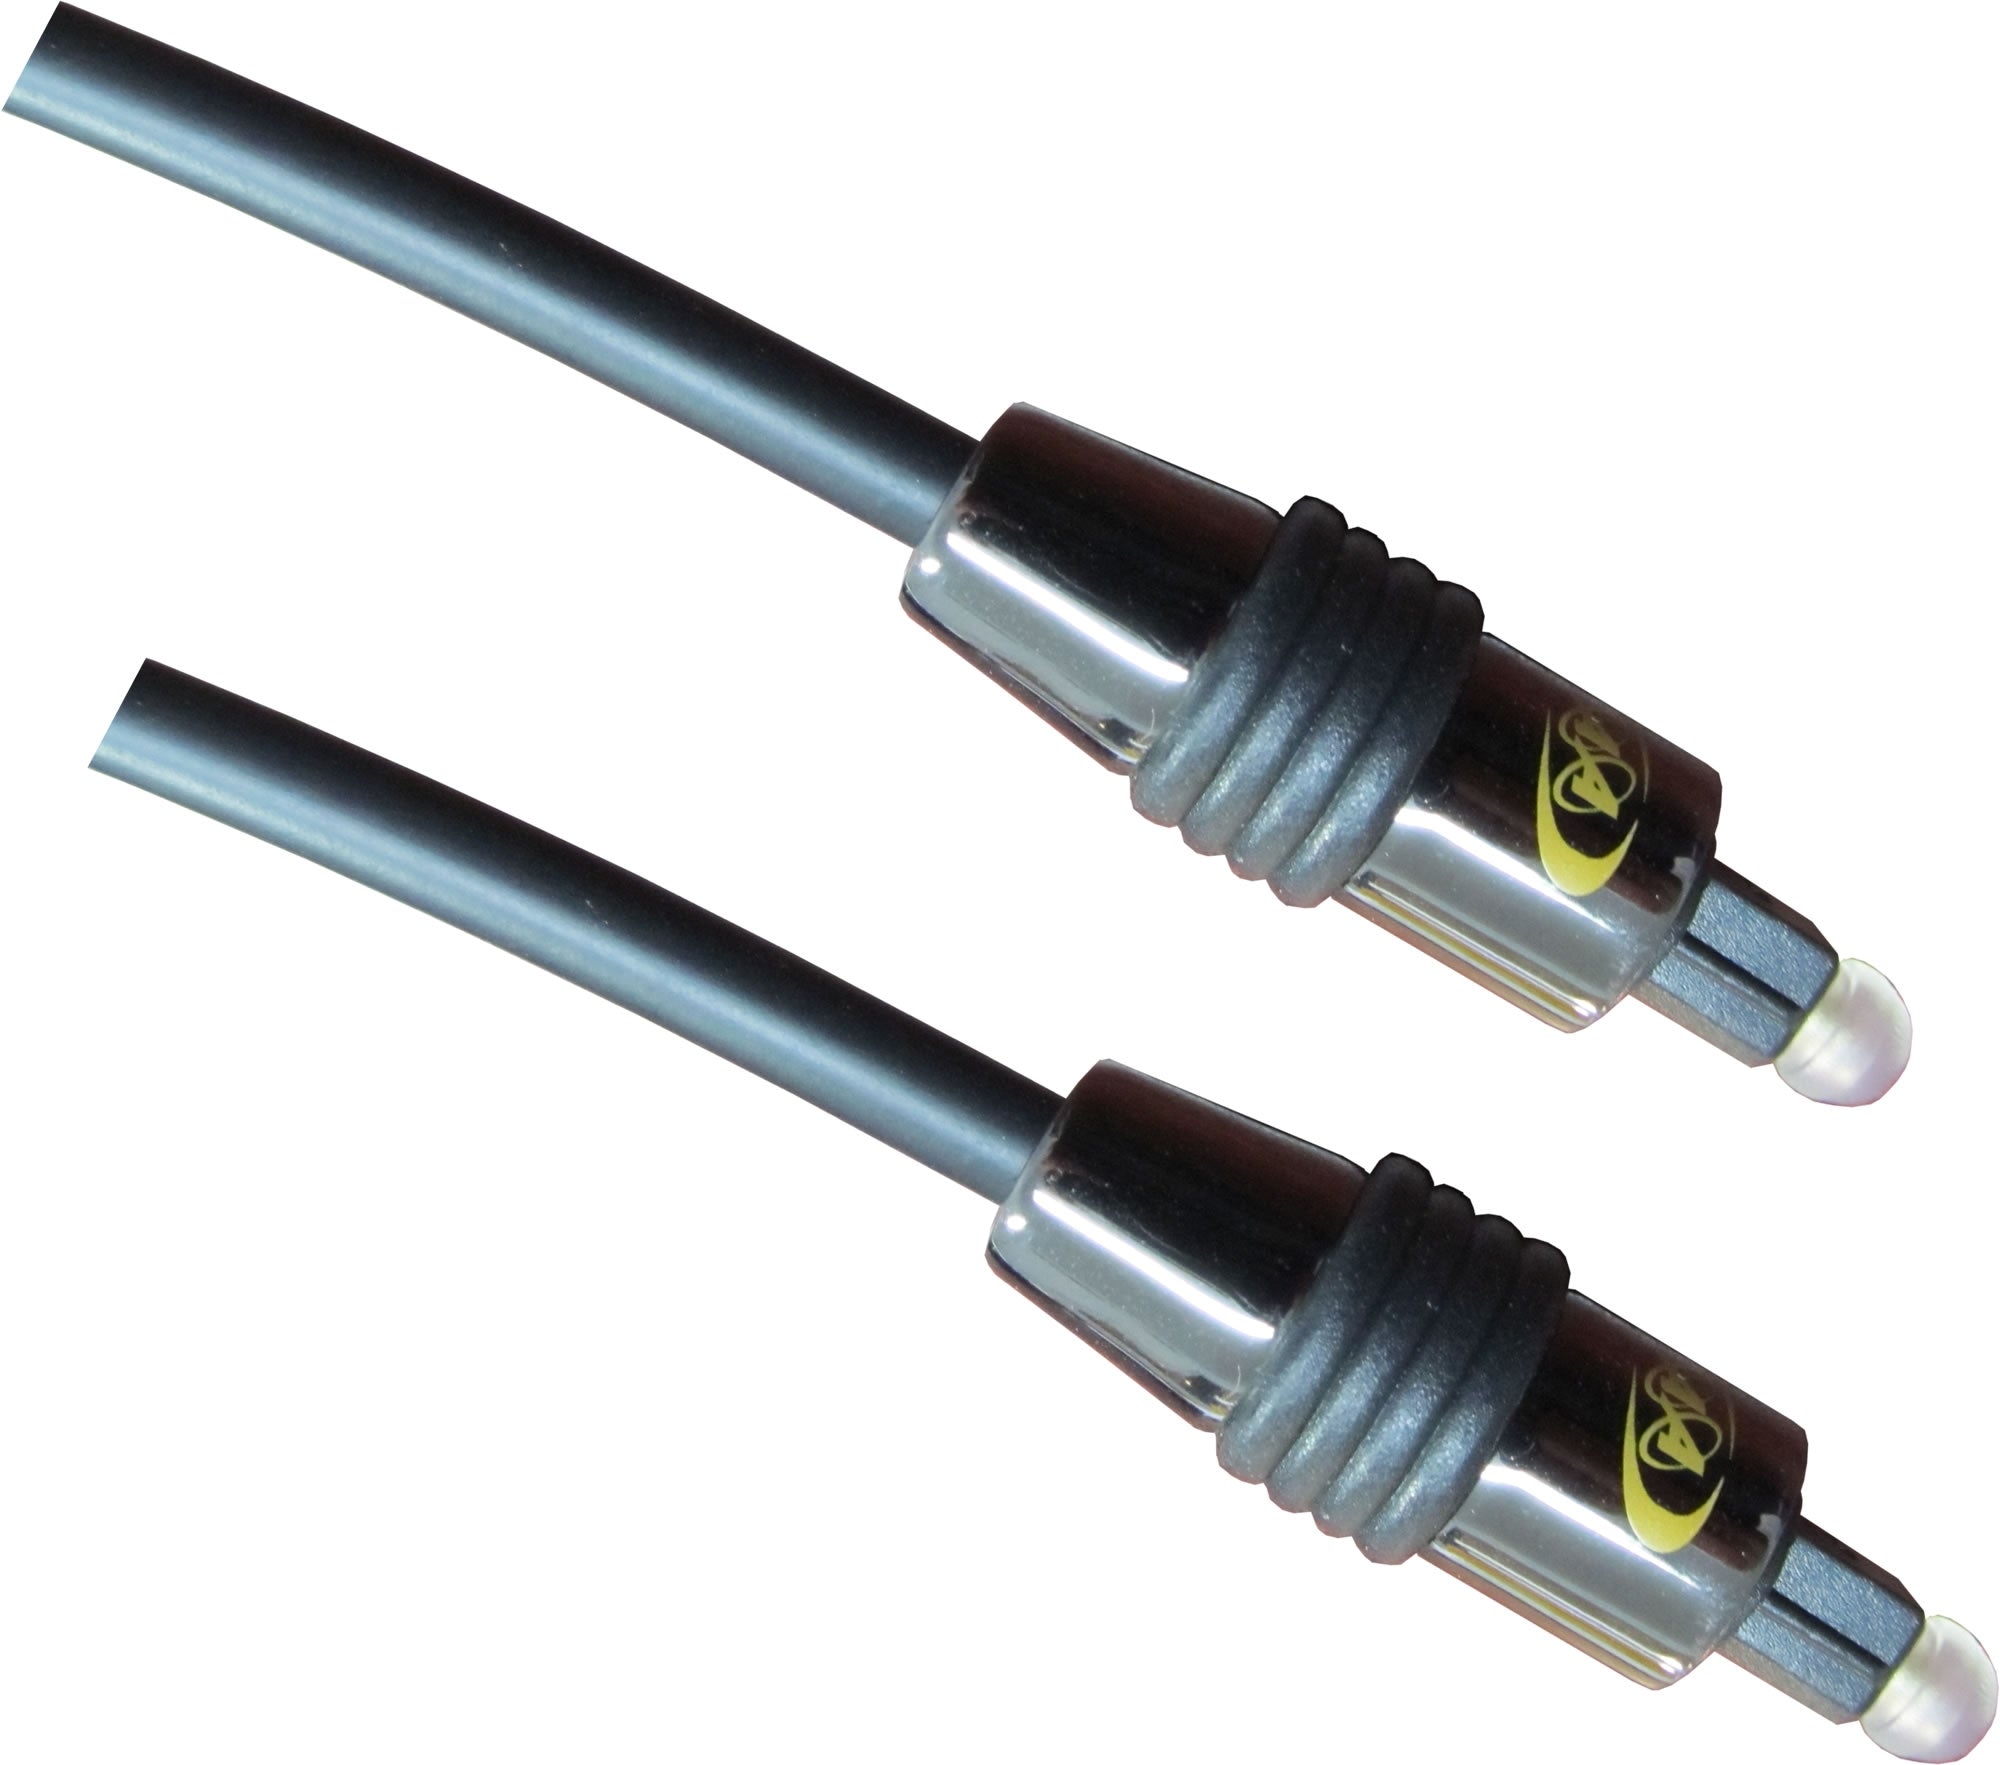 Toslink Optical Audio Cable 12 FT